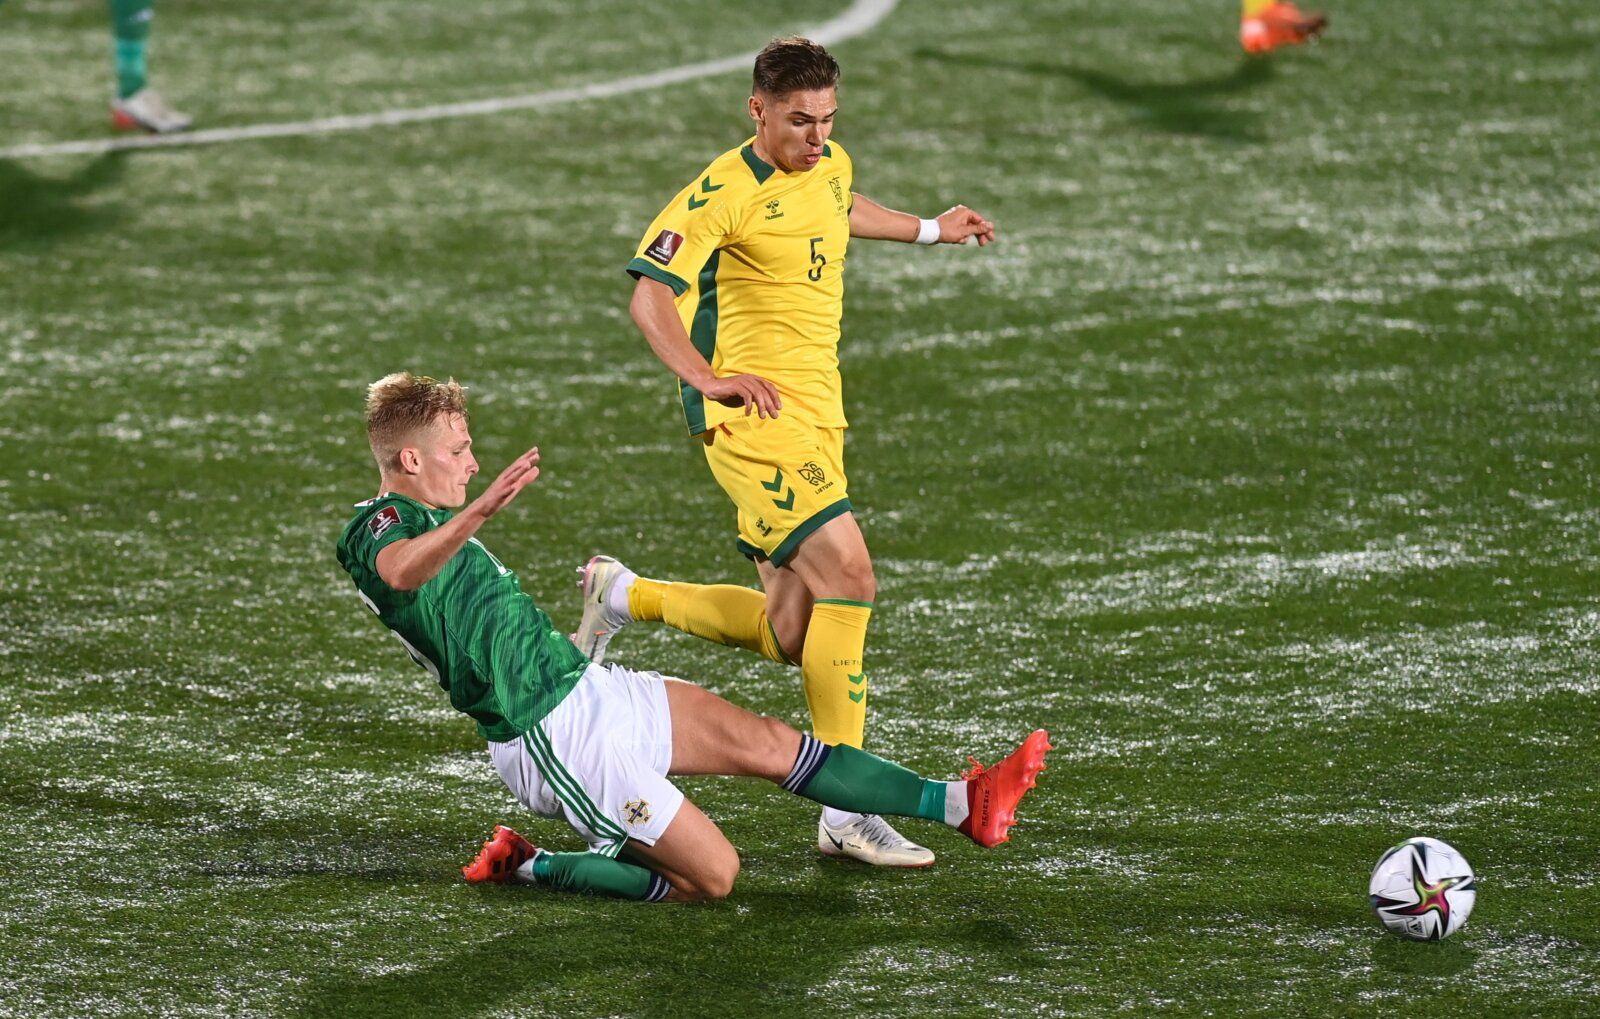 Soccer Football - World Cup - UEFA Qualifiers - Group C - Lithuania v Northern Ireland - LFF Stadium, Vilnius, Lithuania - September 2, 2021 Northern Ireland's Gavin Whyte in action with Lithuania's Karolis Uzela REUTERS/Alfredas Pliadis